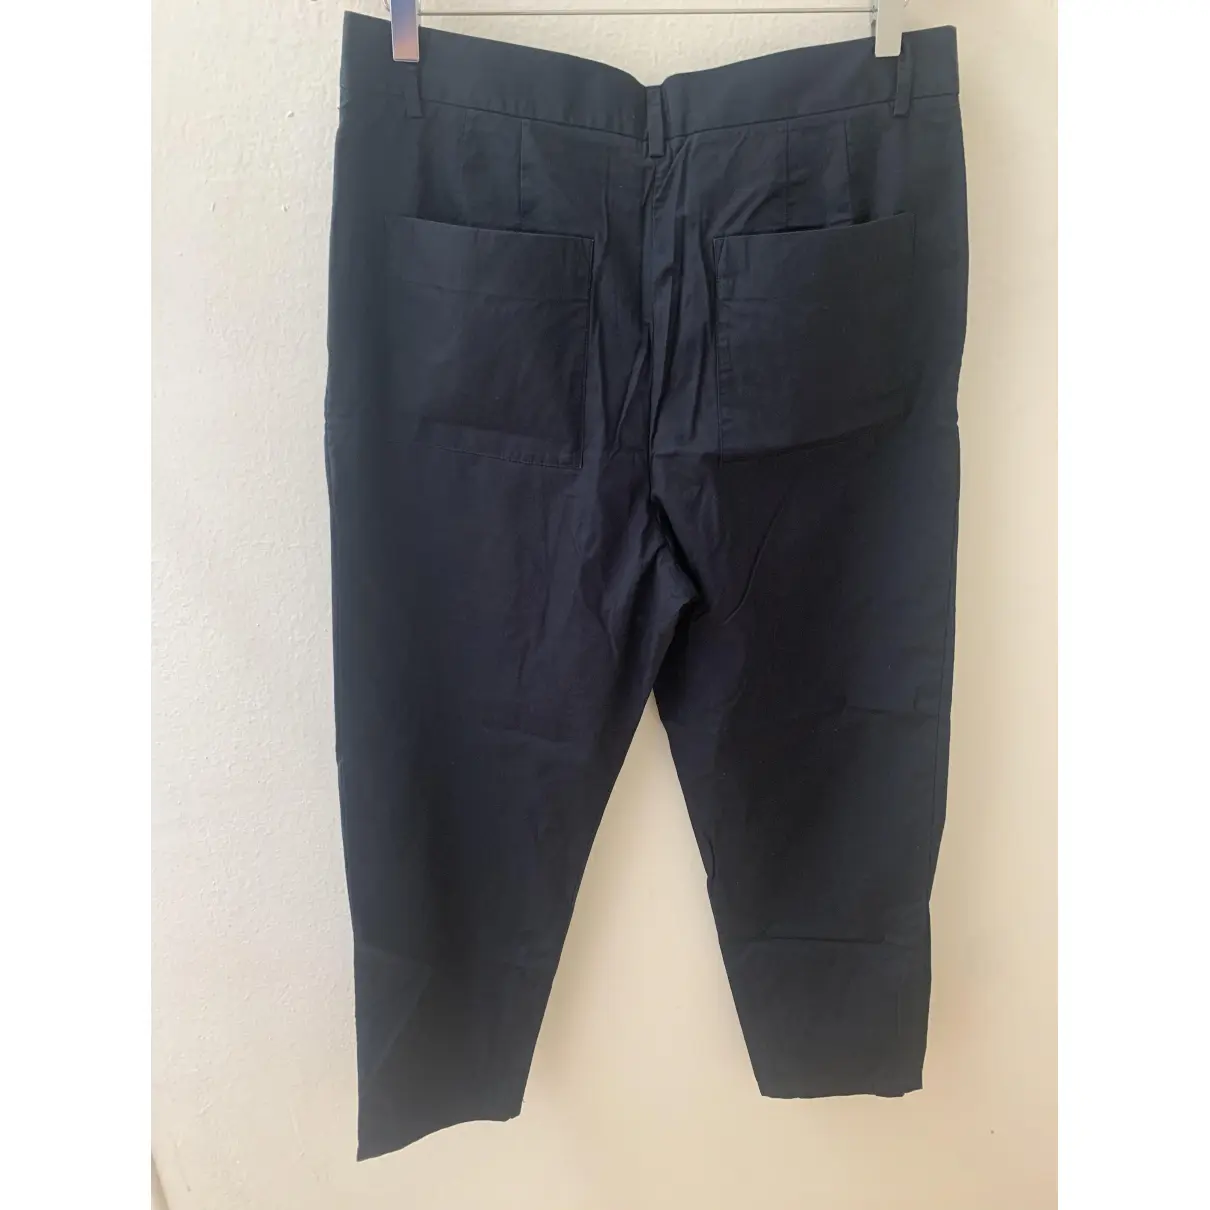 Buy Cos Trousers online